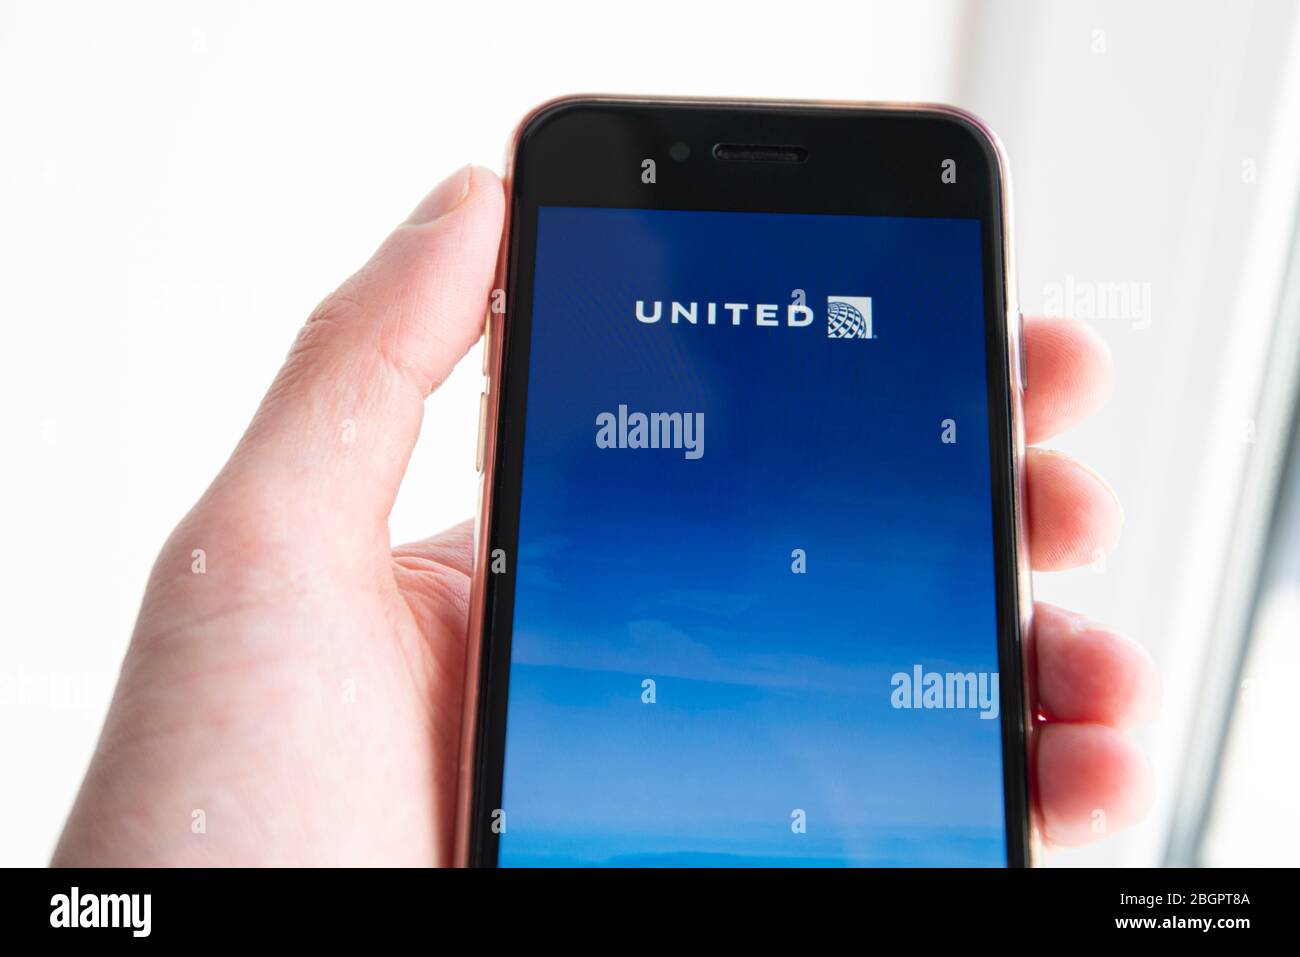 united airline app for phone